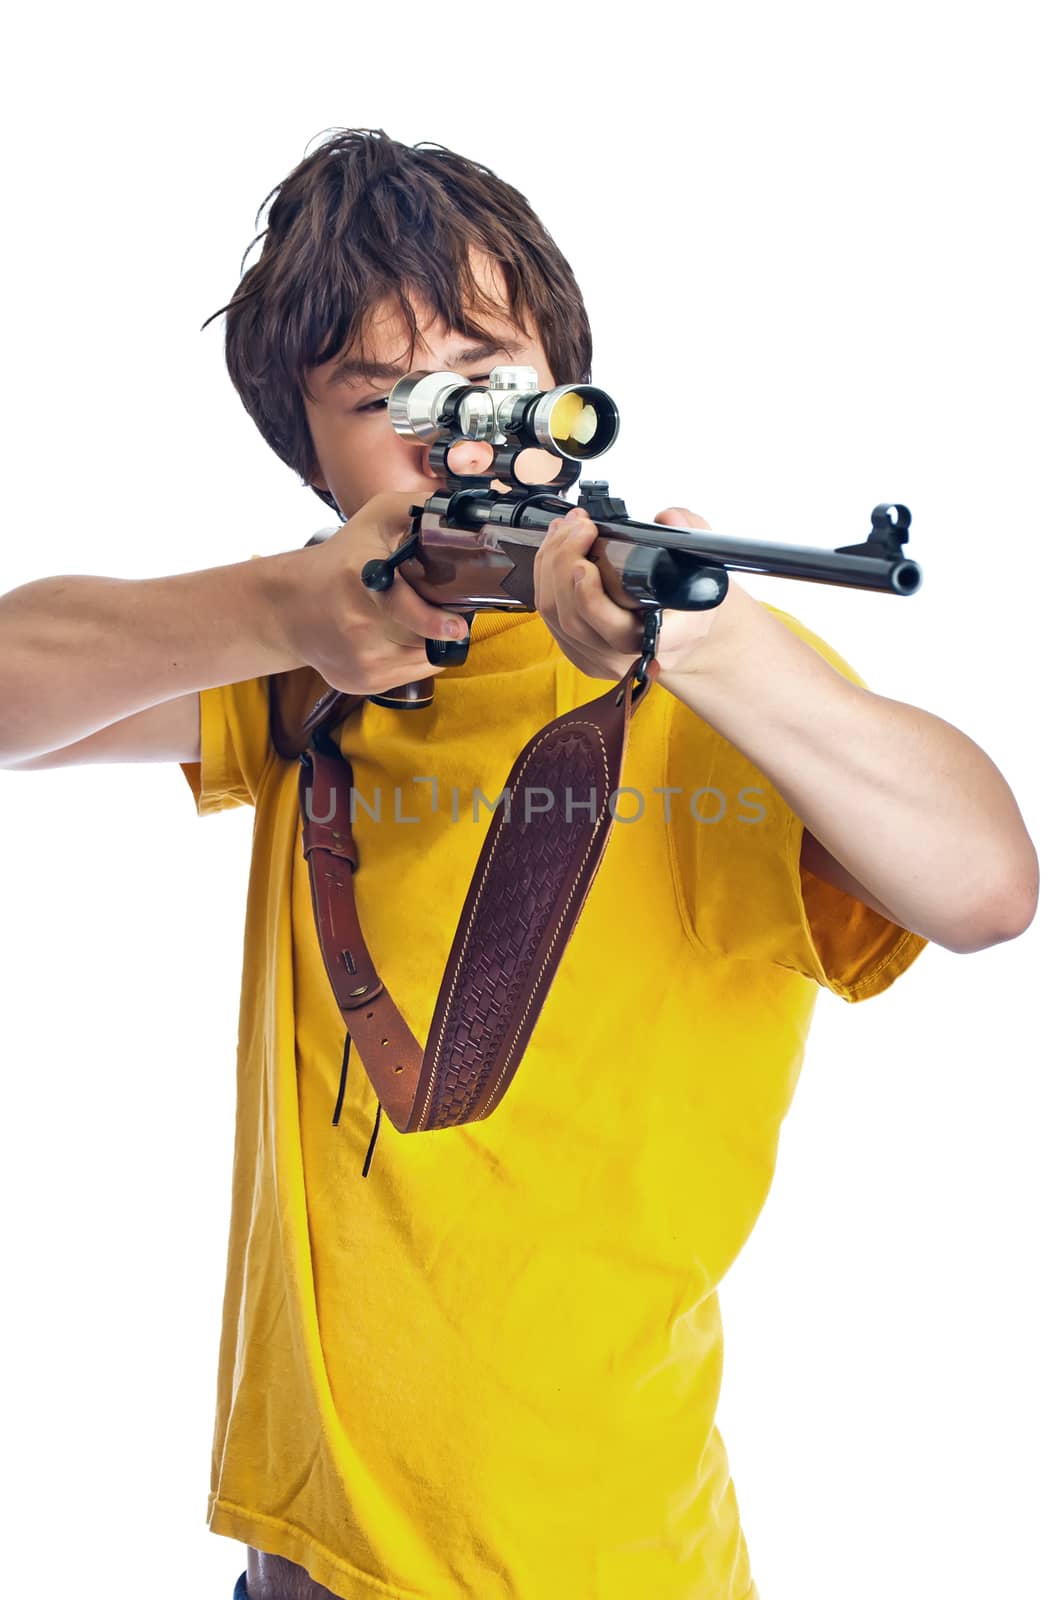 Young adult male pointing a 30-06 hunting rifle, aiming with a scope. Isolated on white